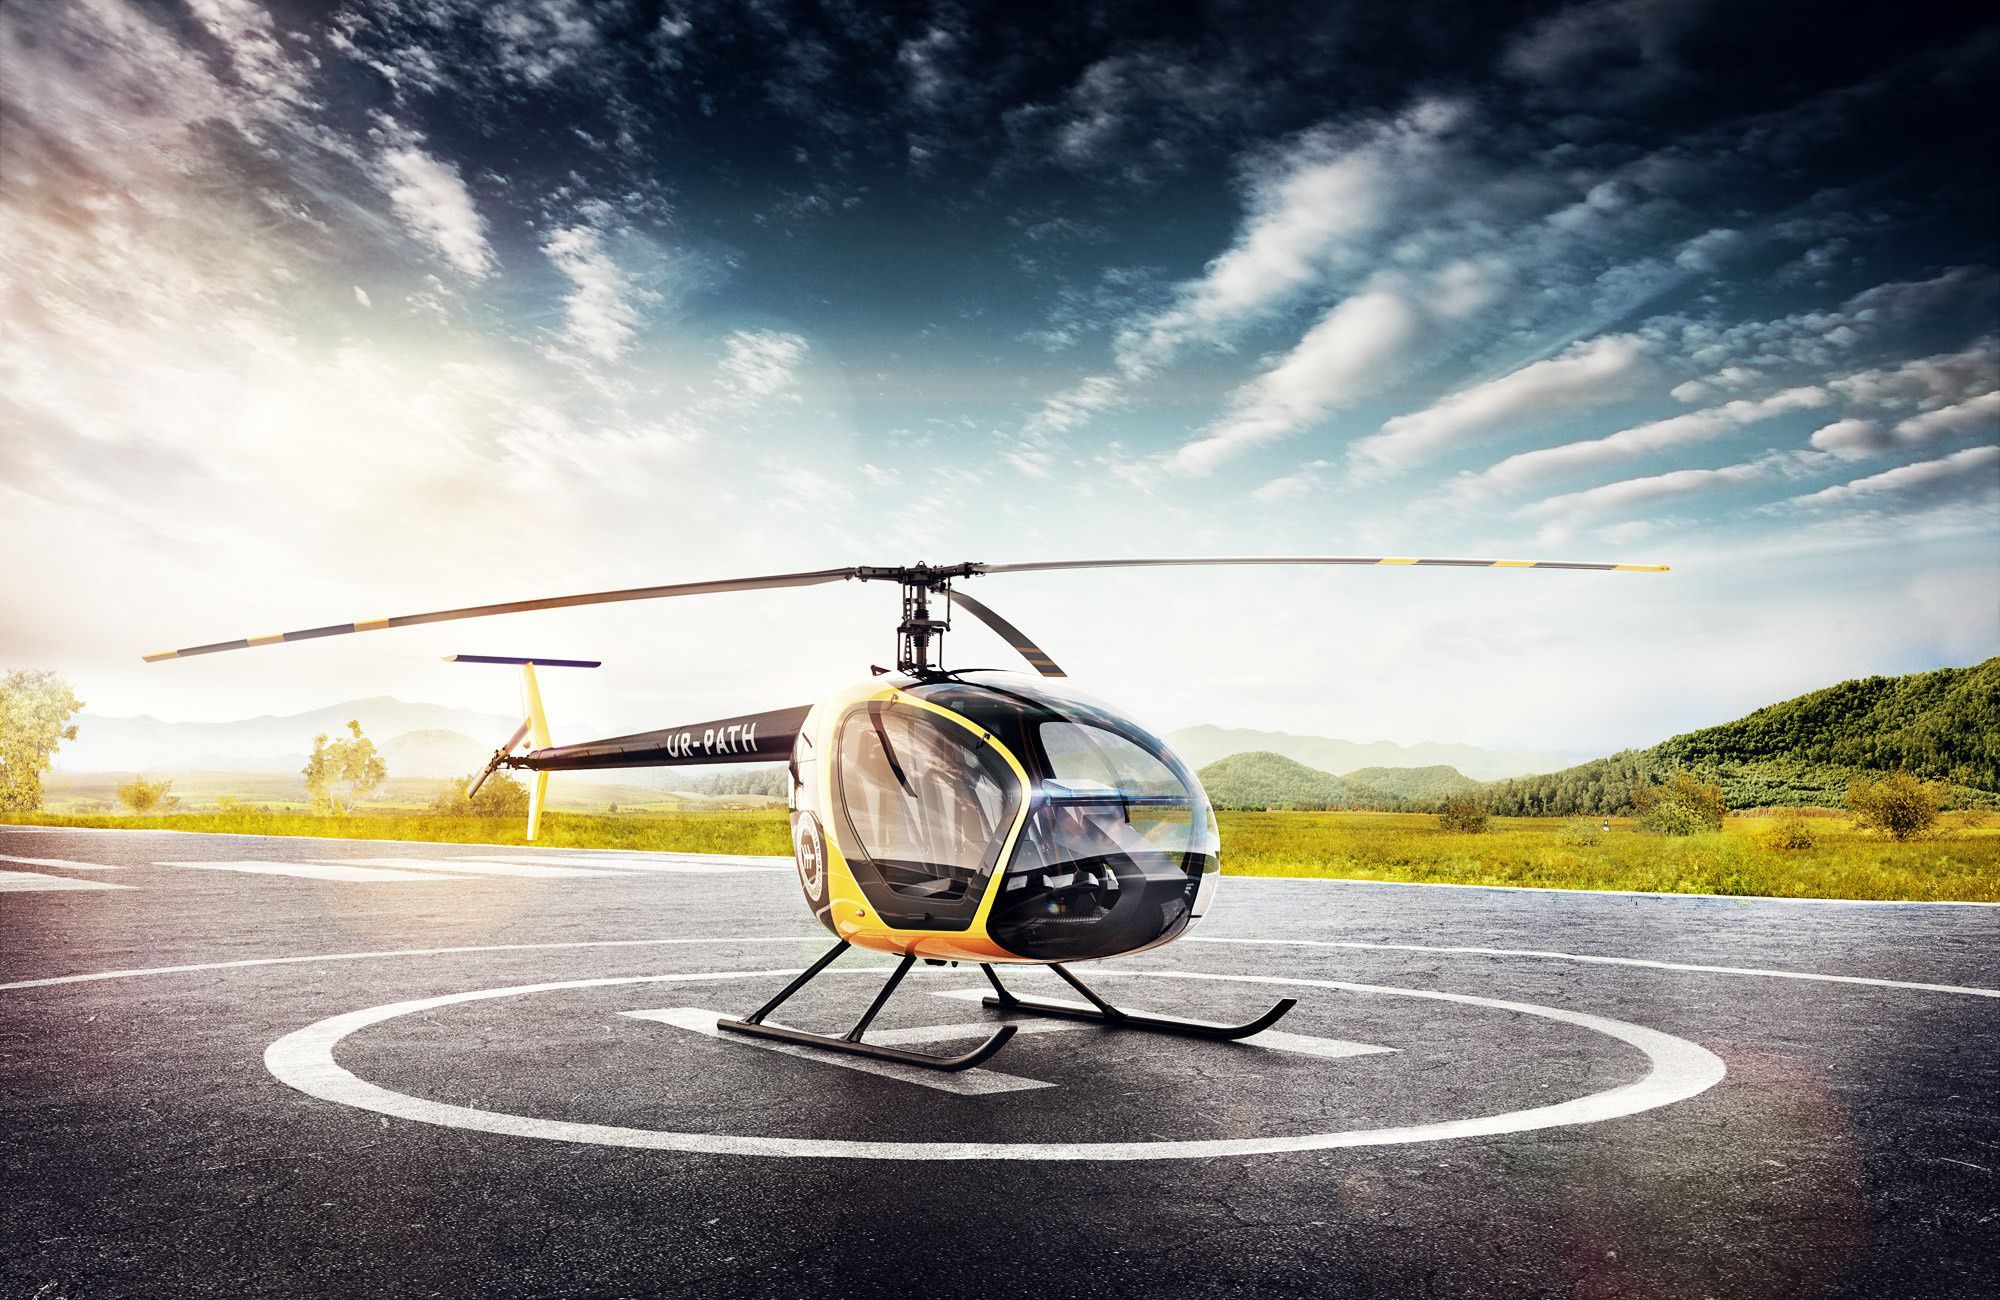 Helicopter wallpapers